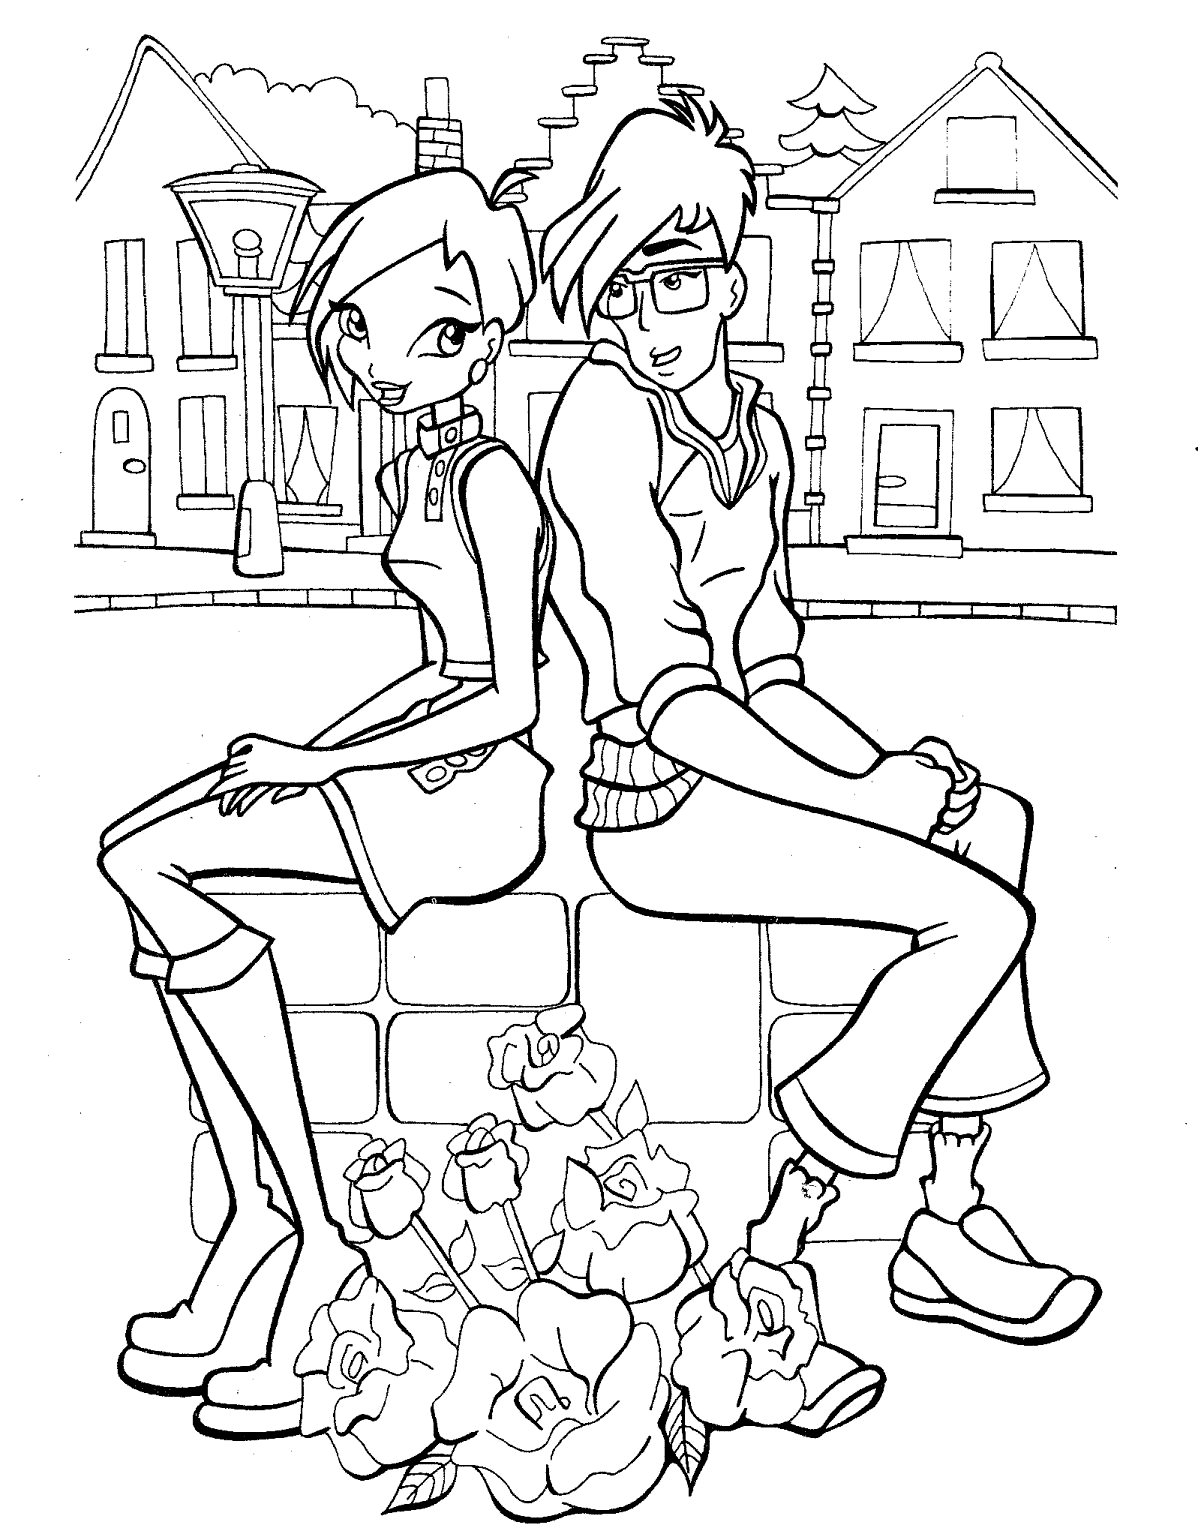 Coloring page - Tecna and Timmy